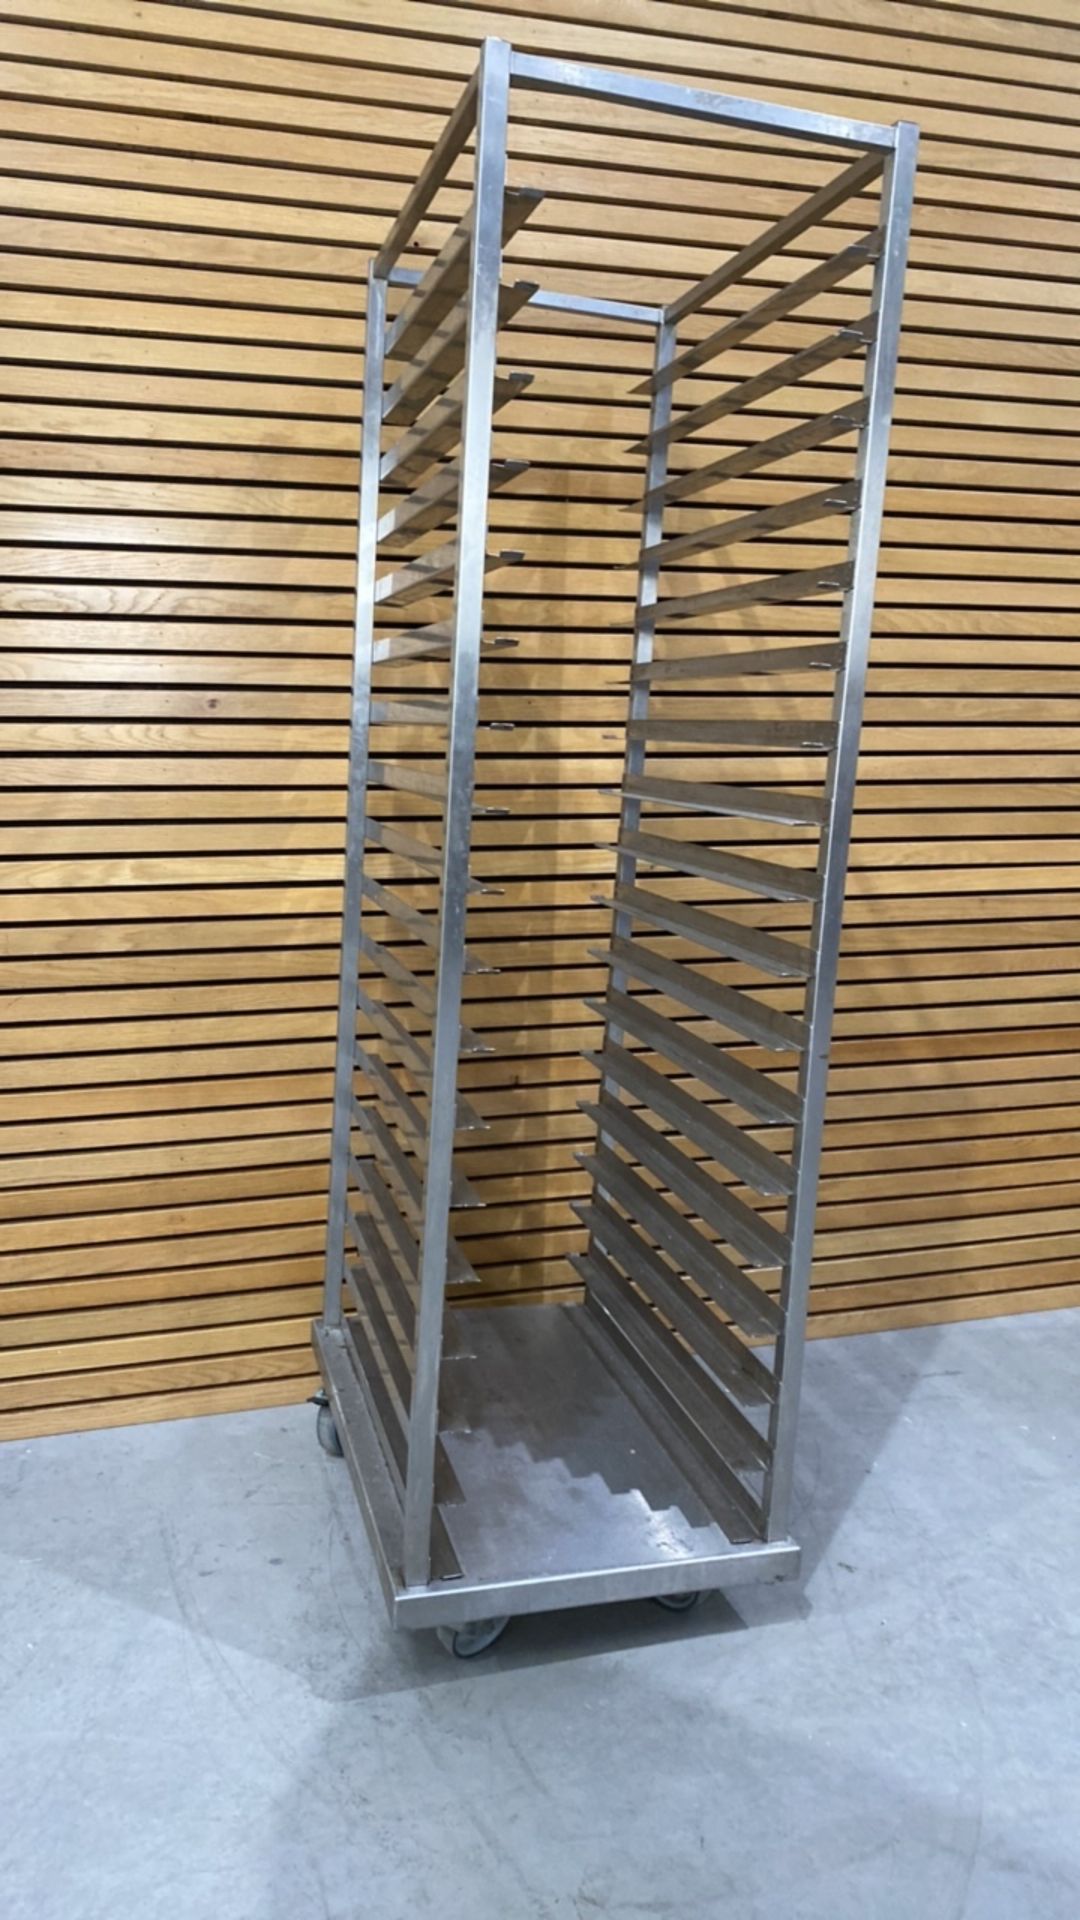 Stainless Steel Tray/Sheet Rack - Image 2 of 3